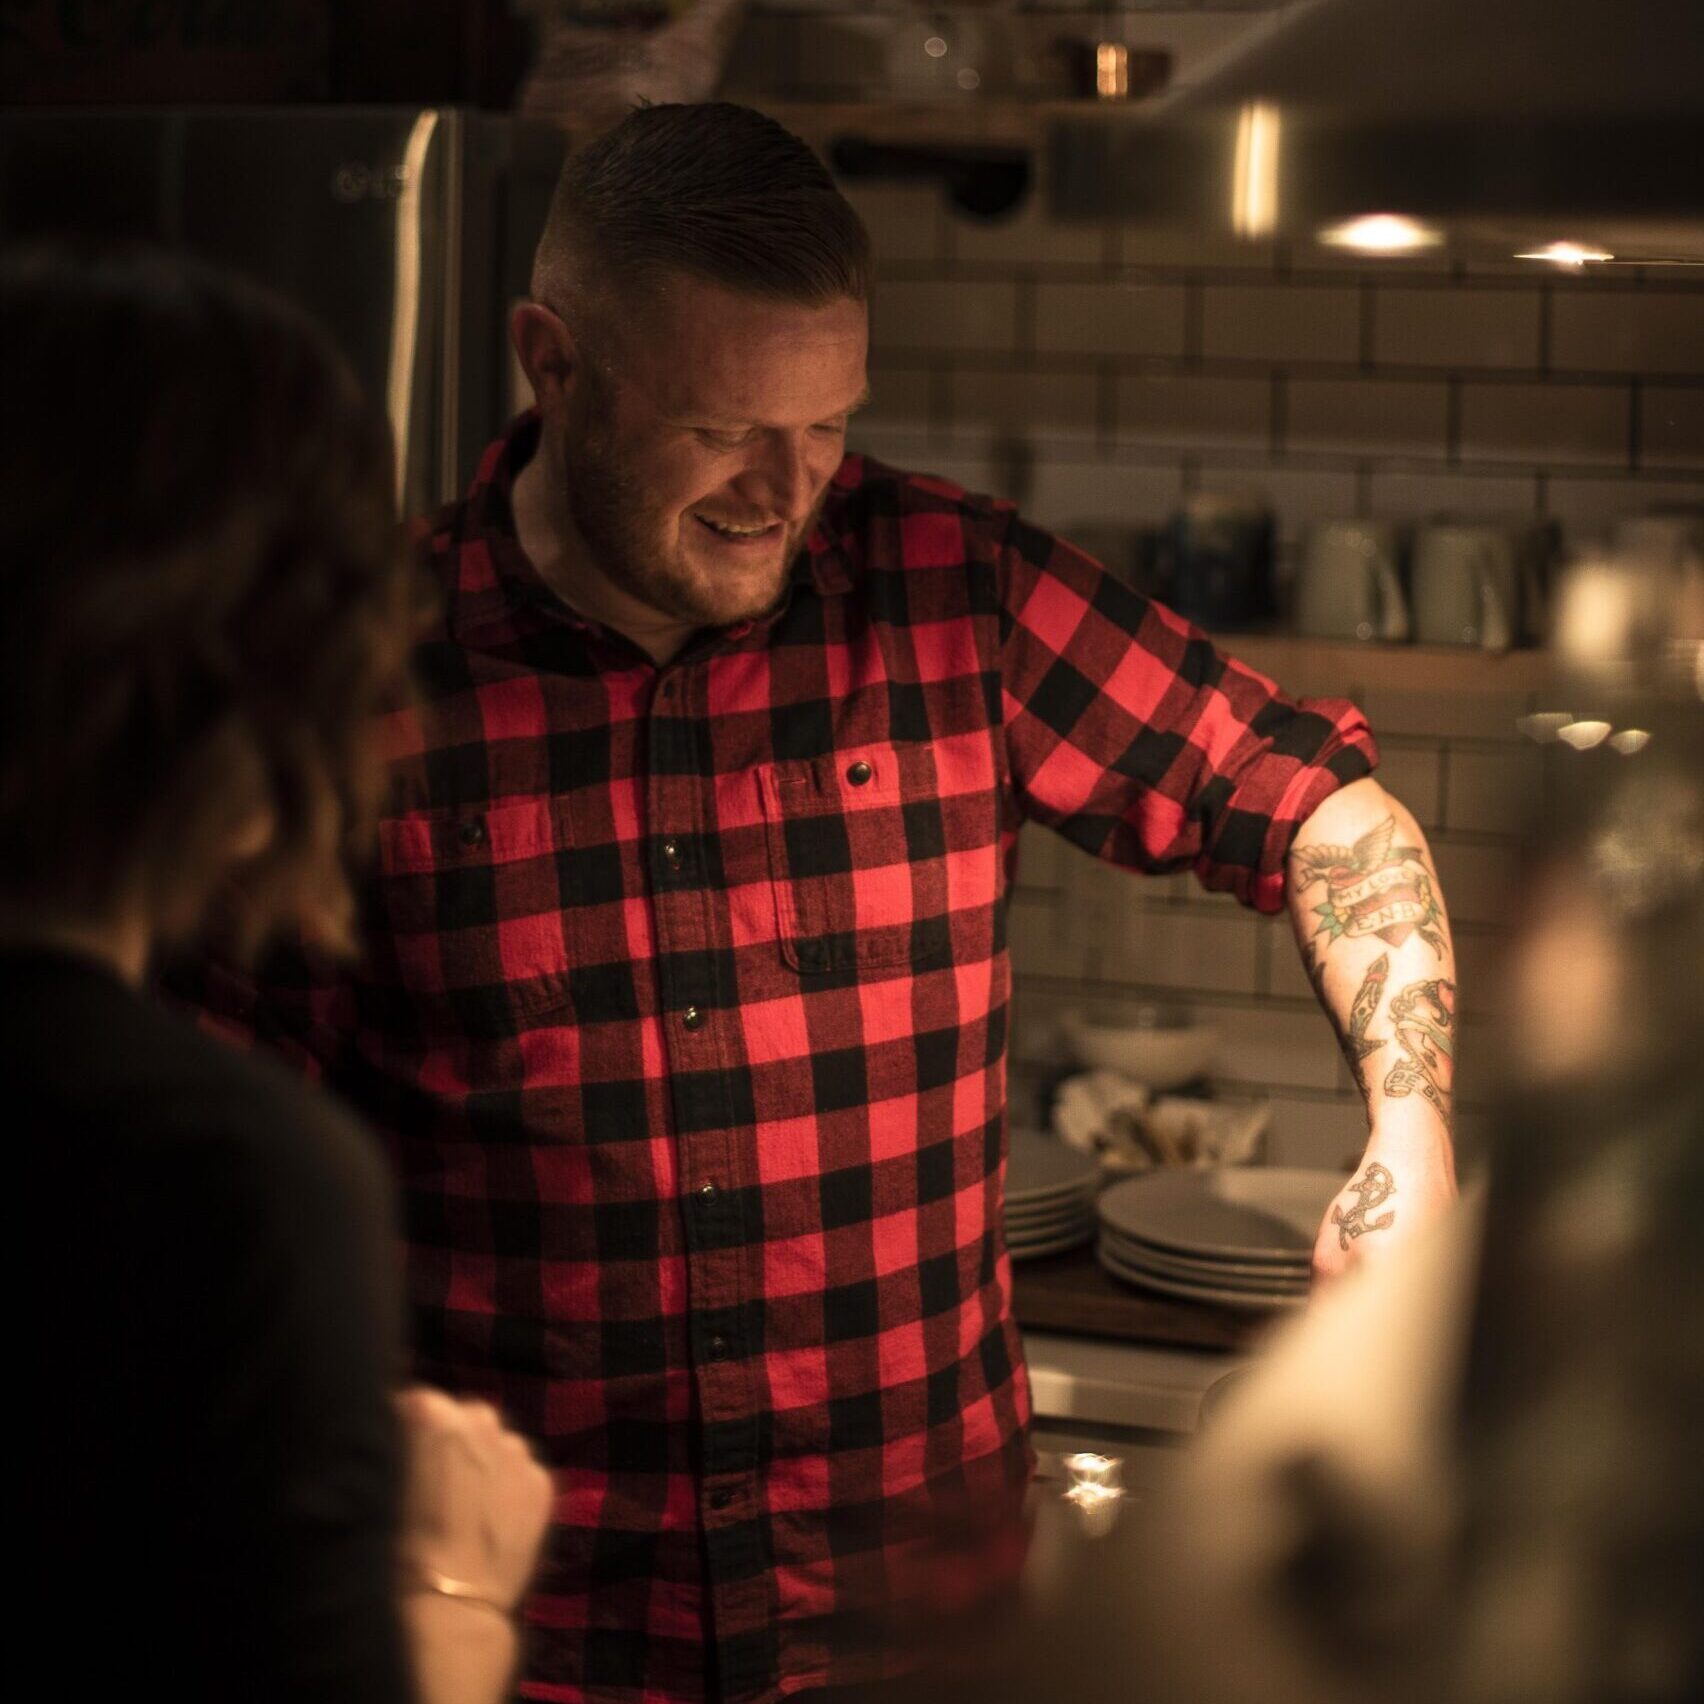 man in a buffalo check plaid shirt with lots of tattoos cooking over a stove in low light